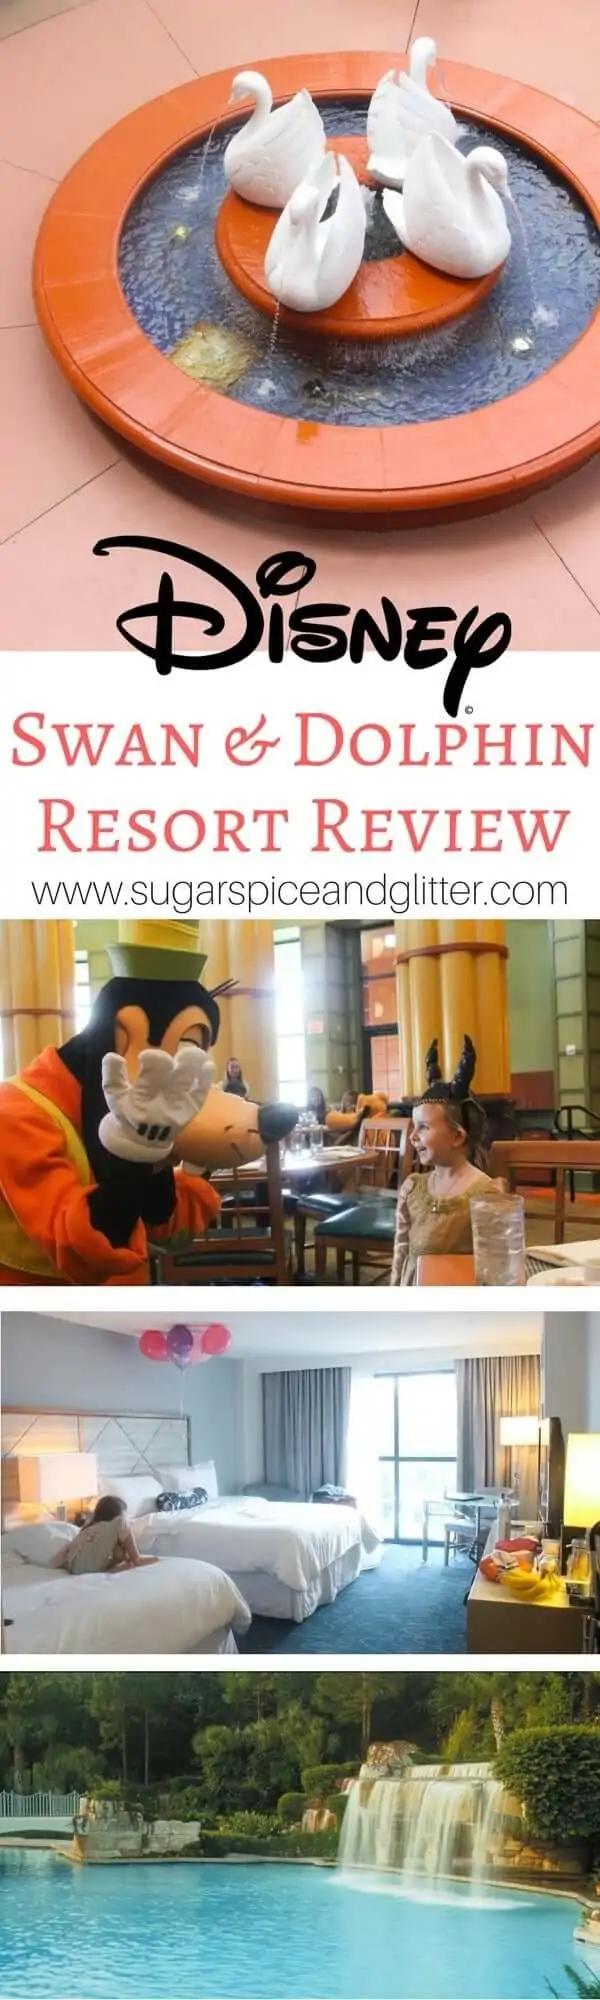 An honest and in-depth review of the Swan and Dolphin resort by a Disney mom. The food, the character meals, the pool complex, entertainment and more - this mom shares the good and the bad about her experience at the Swan